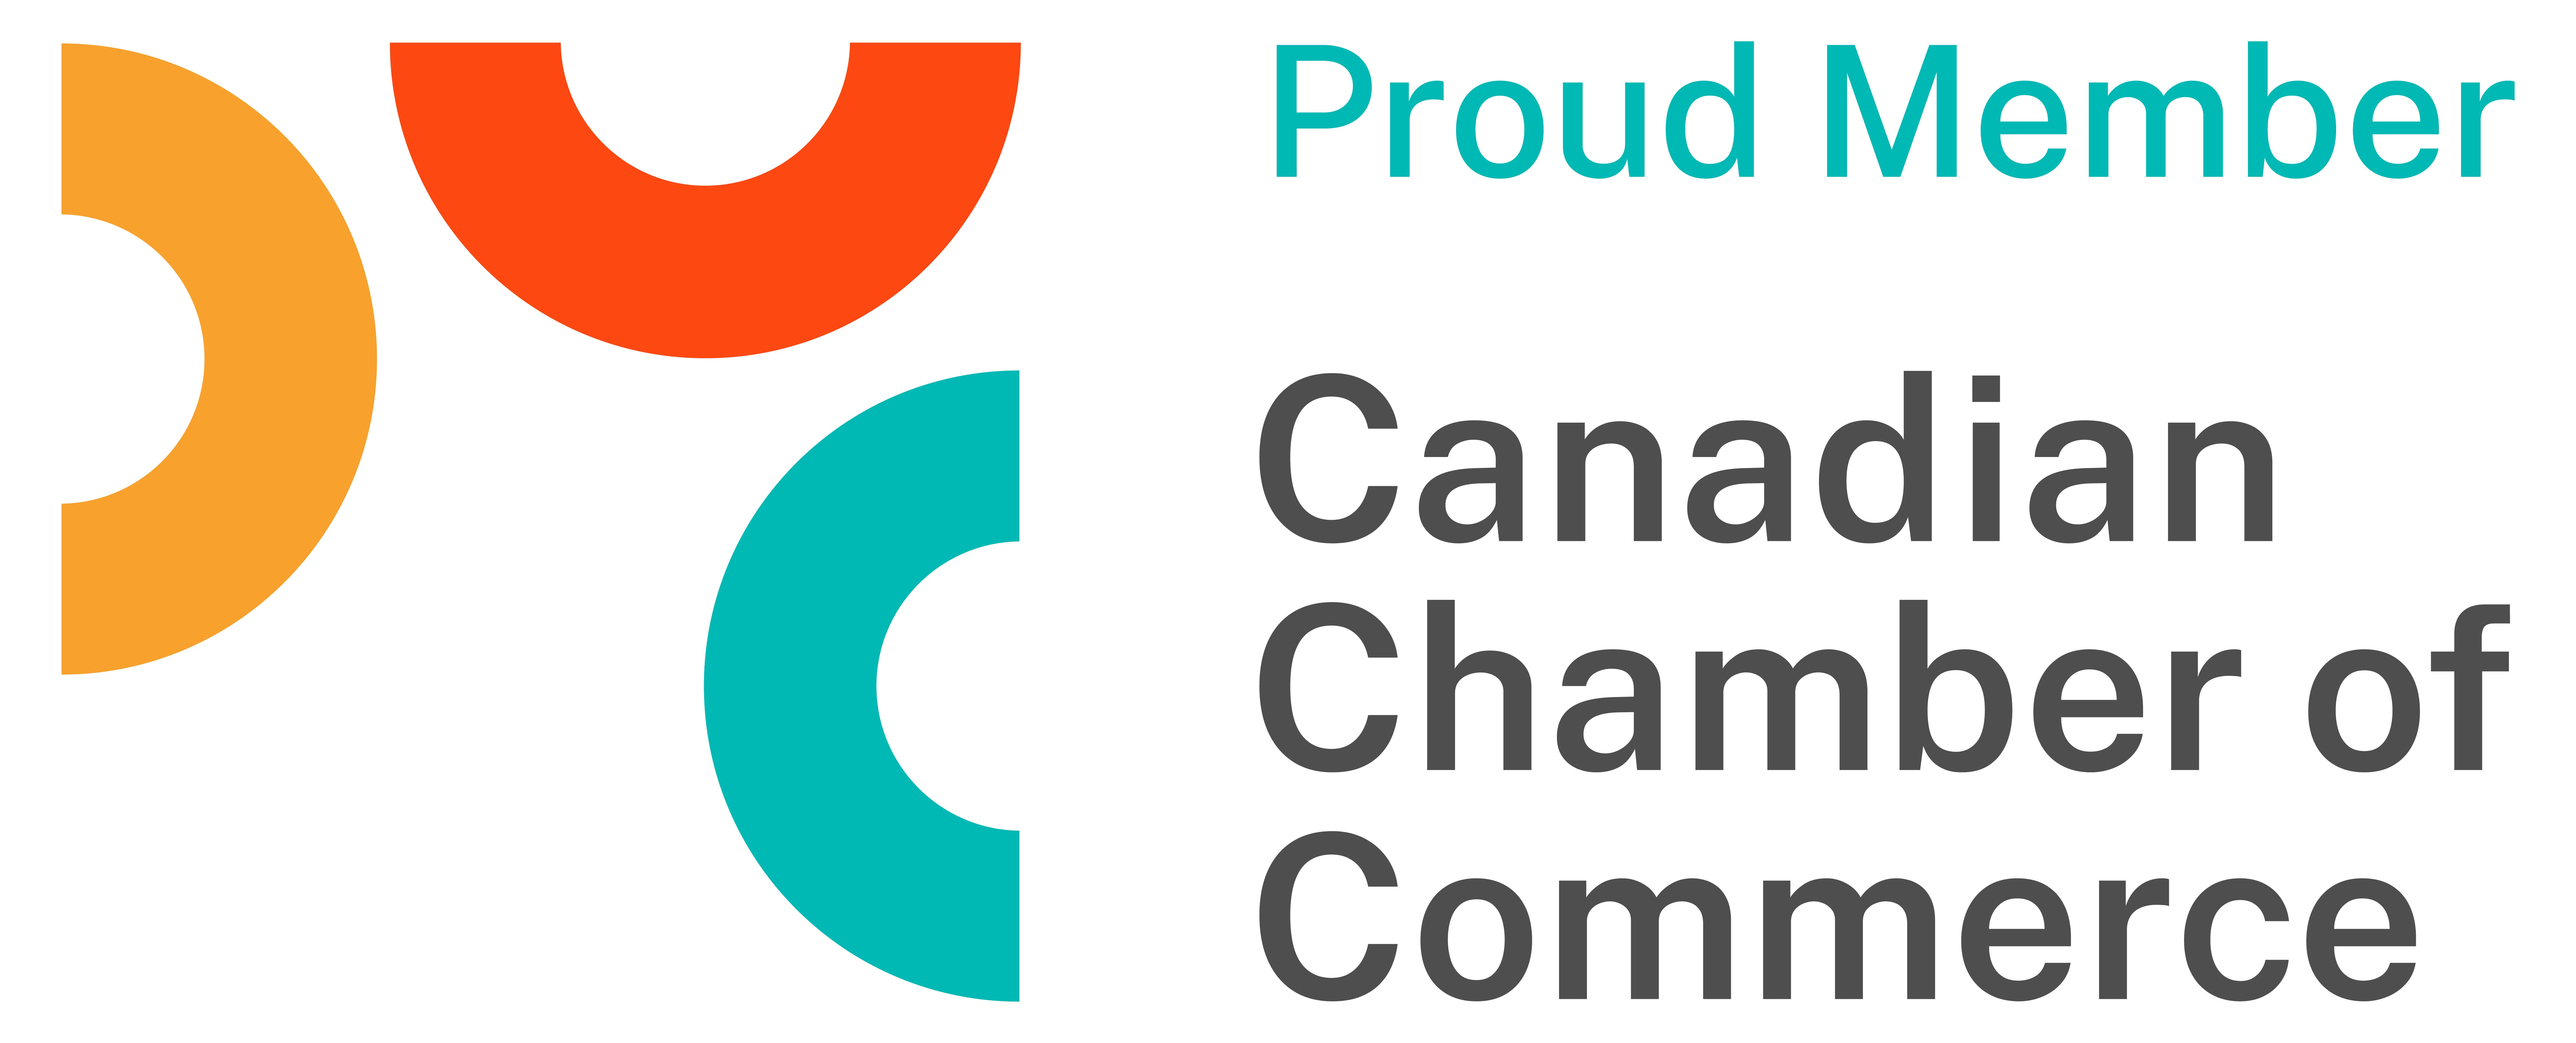 Multi colour logo with the words "Proud Member" and "Canadian Chamber of Commerce"